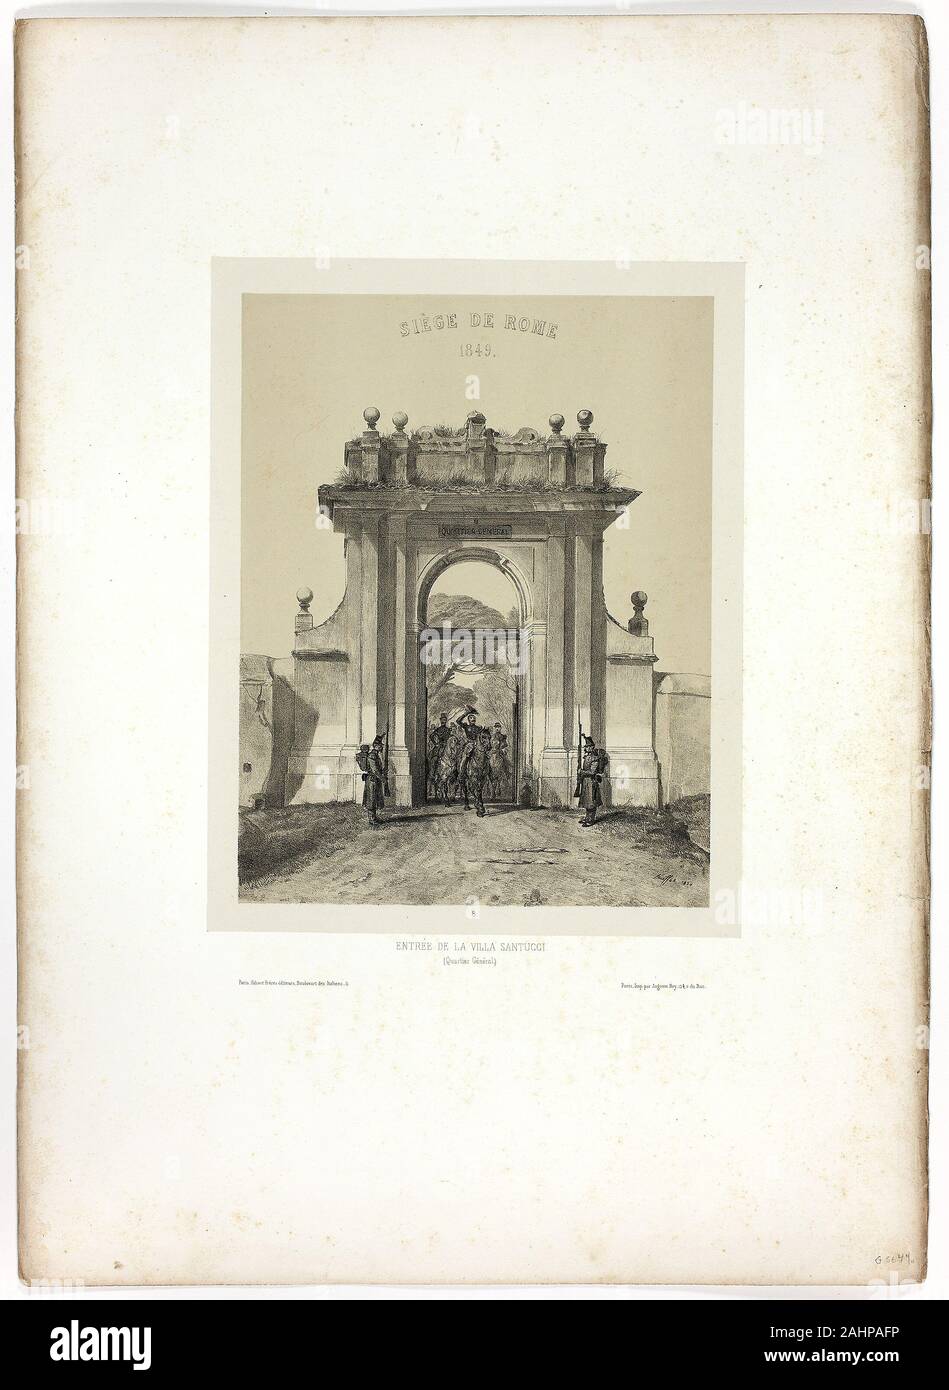 Denis Auguste Marie Raffet. Entering the Villa Santucci, from Souvenirs d’Italie Expédition de Rome. 1850. France. Lithograph in black over a fawn tint on buff wove chine laid down on ivory wove paper Stock Photo